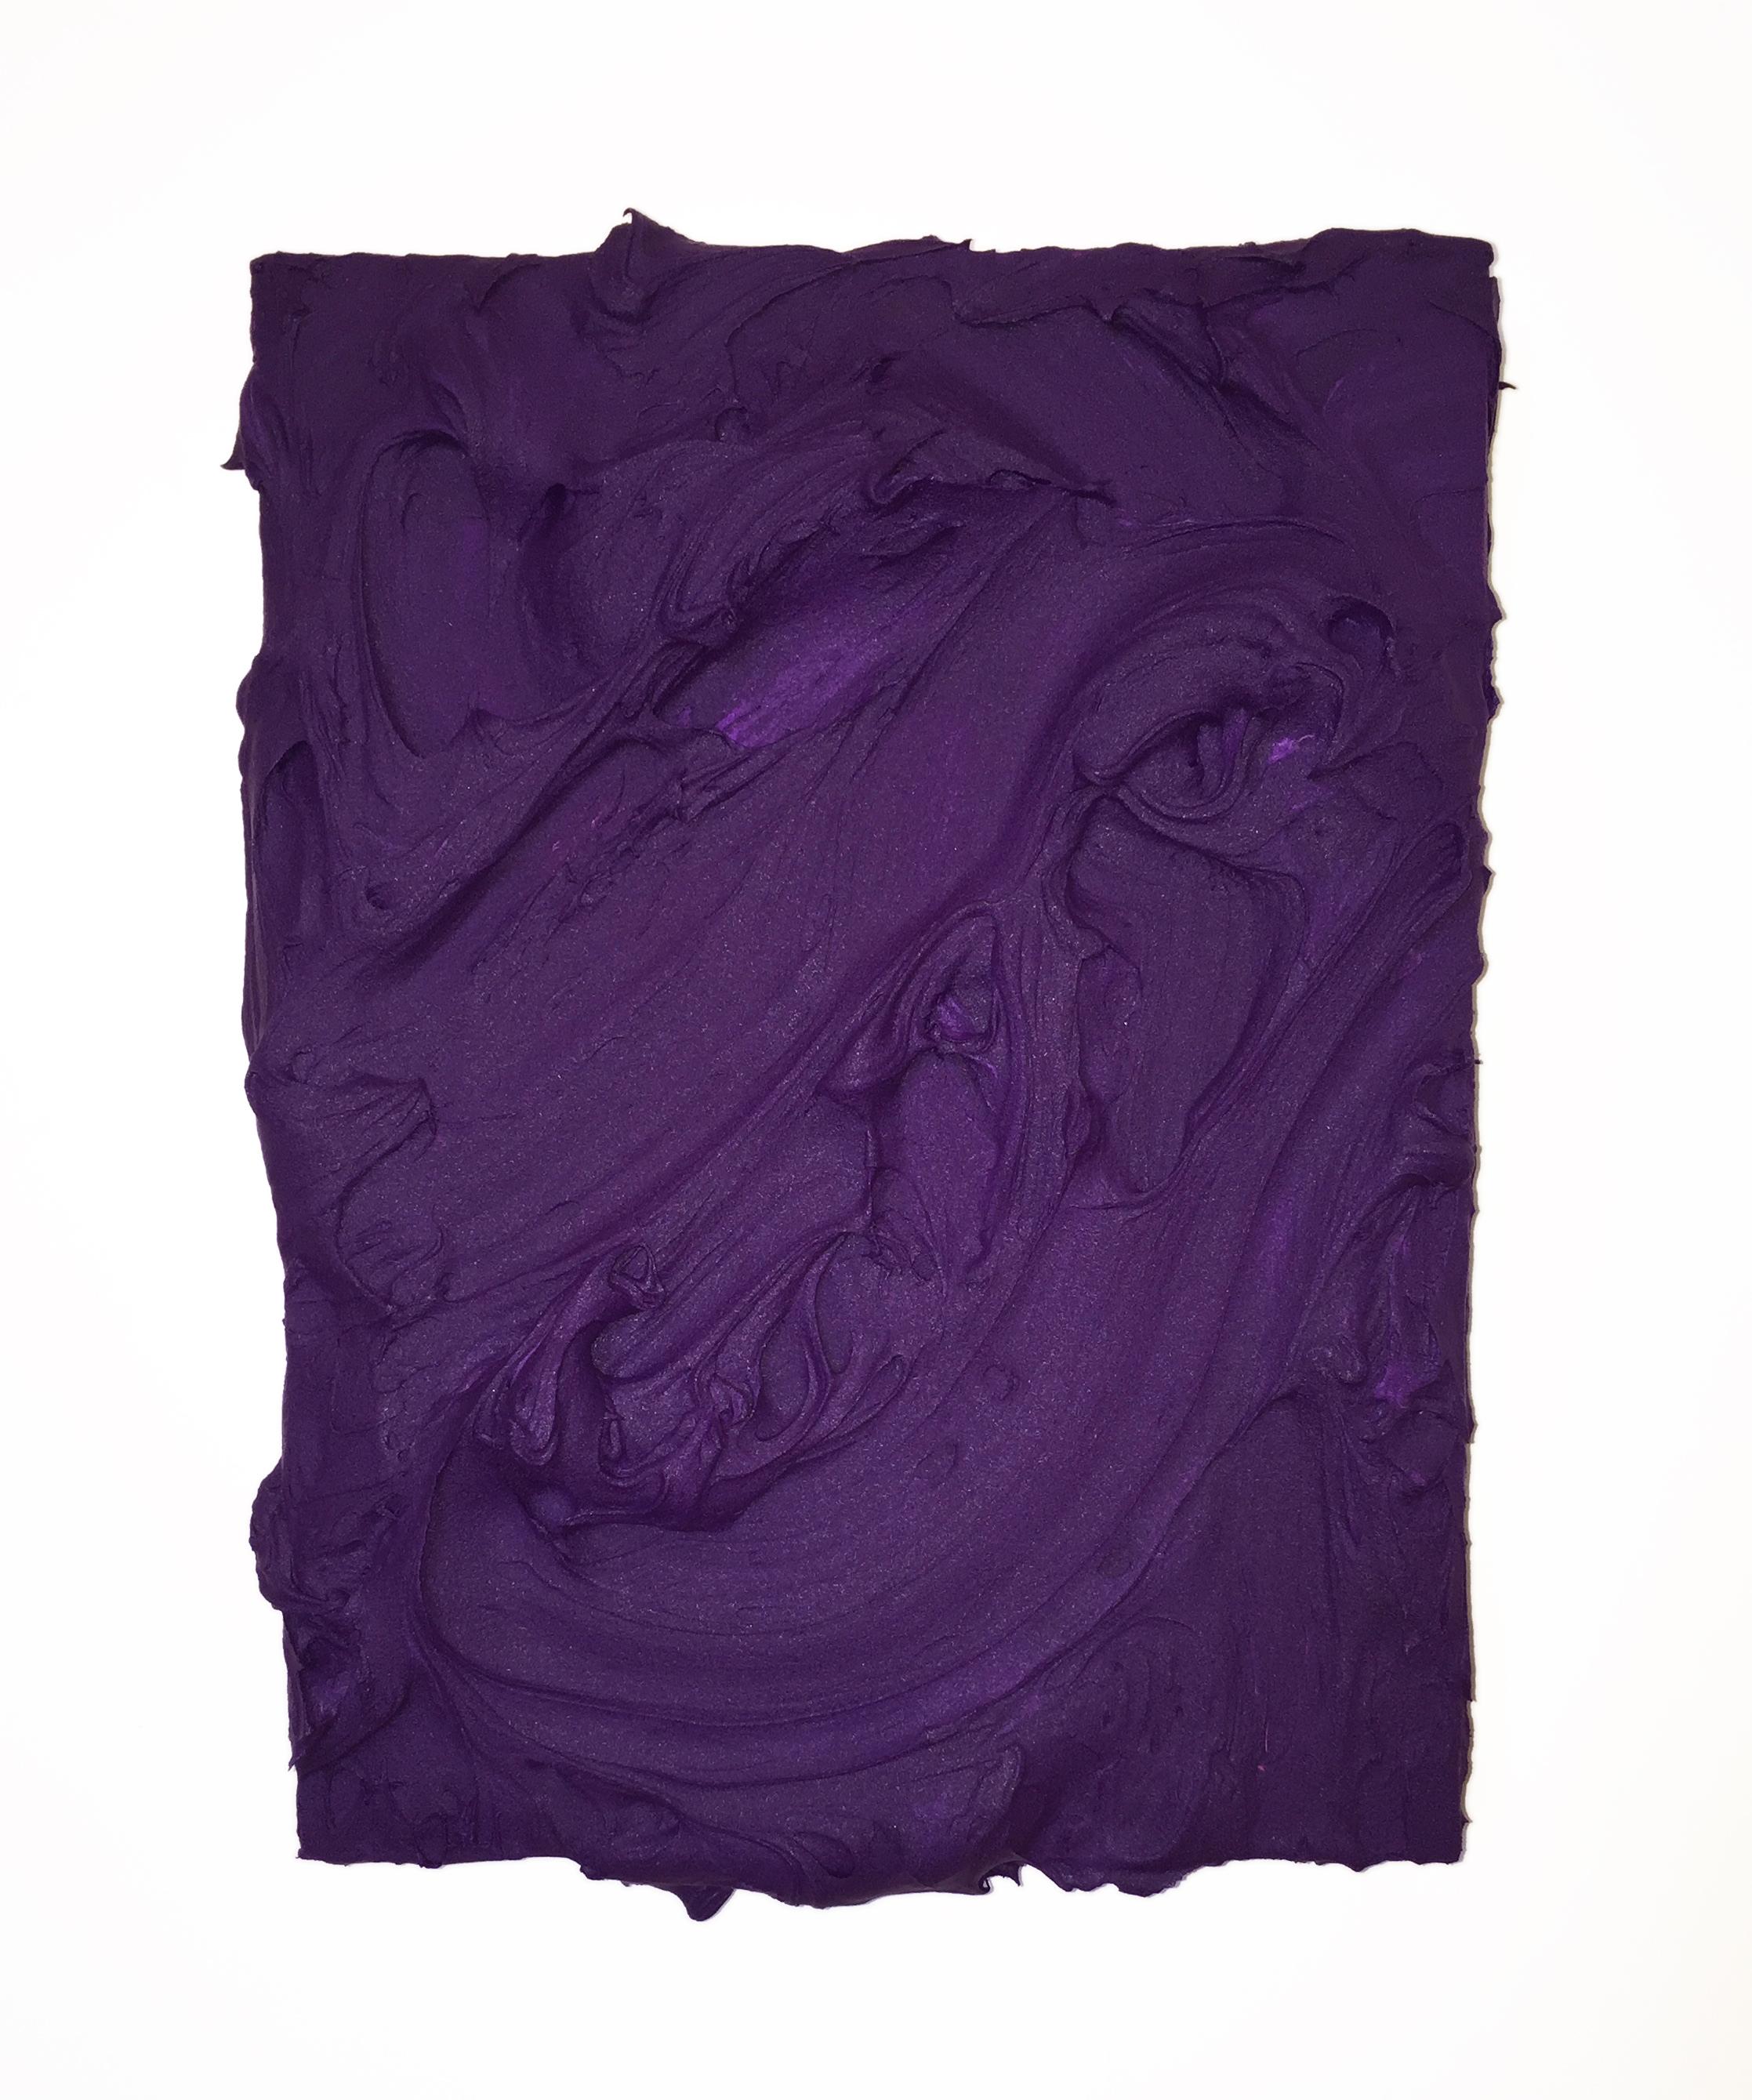 Chloe Hedden Abstract Painting - Grape Excess (violet impasto thick painting dark contemporary design vivid) 